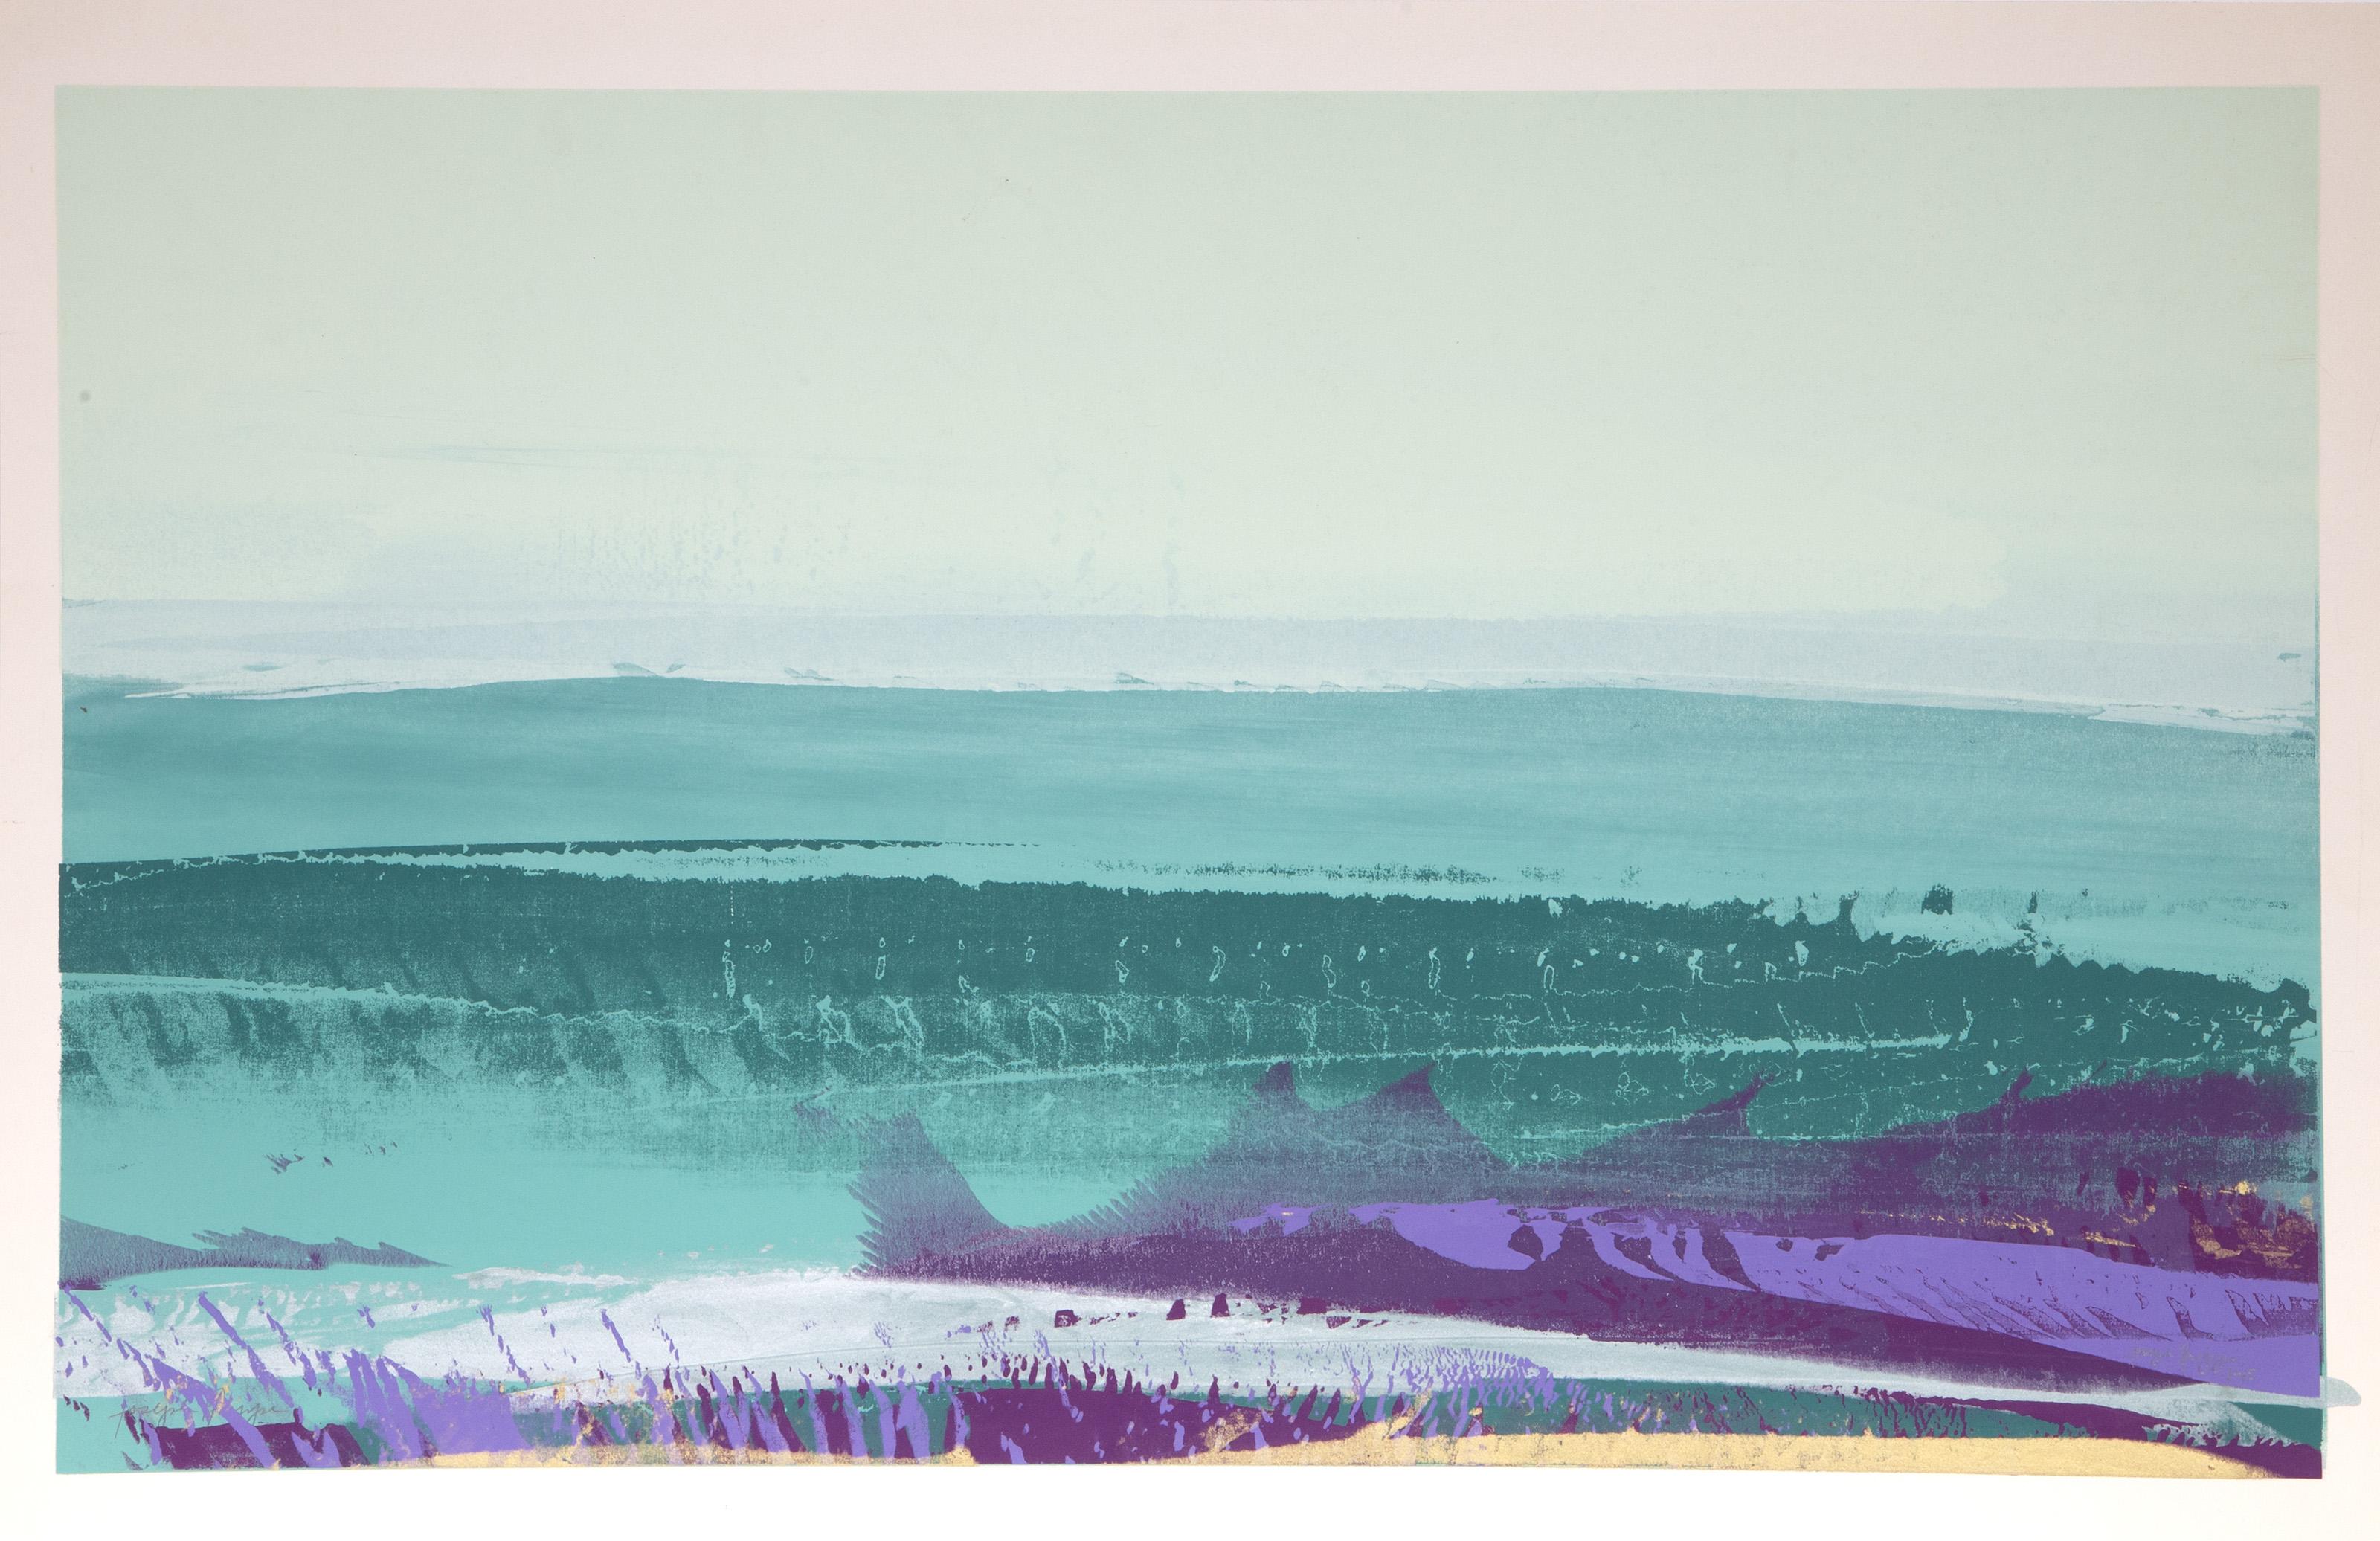 Landscape in Green, Purple and Yellow
Joseph Grippi, American (1924–2001)
Screenprint, signed in pencil
Image Size: 19 x 31 inches
Size: 21.5 x 33 in. (54.61 x 83.82 cm)